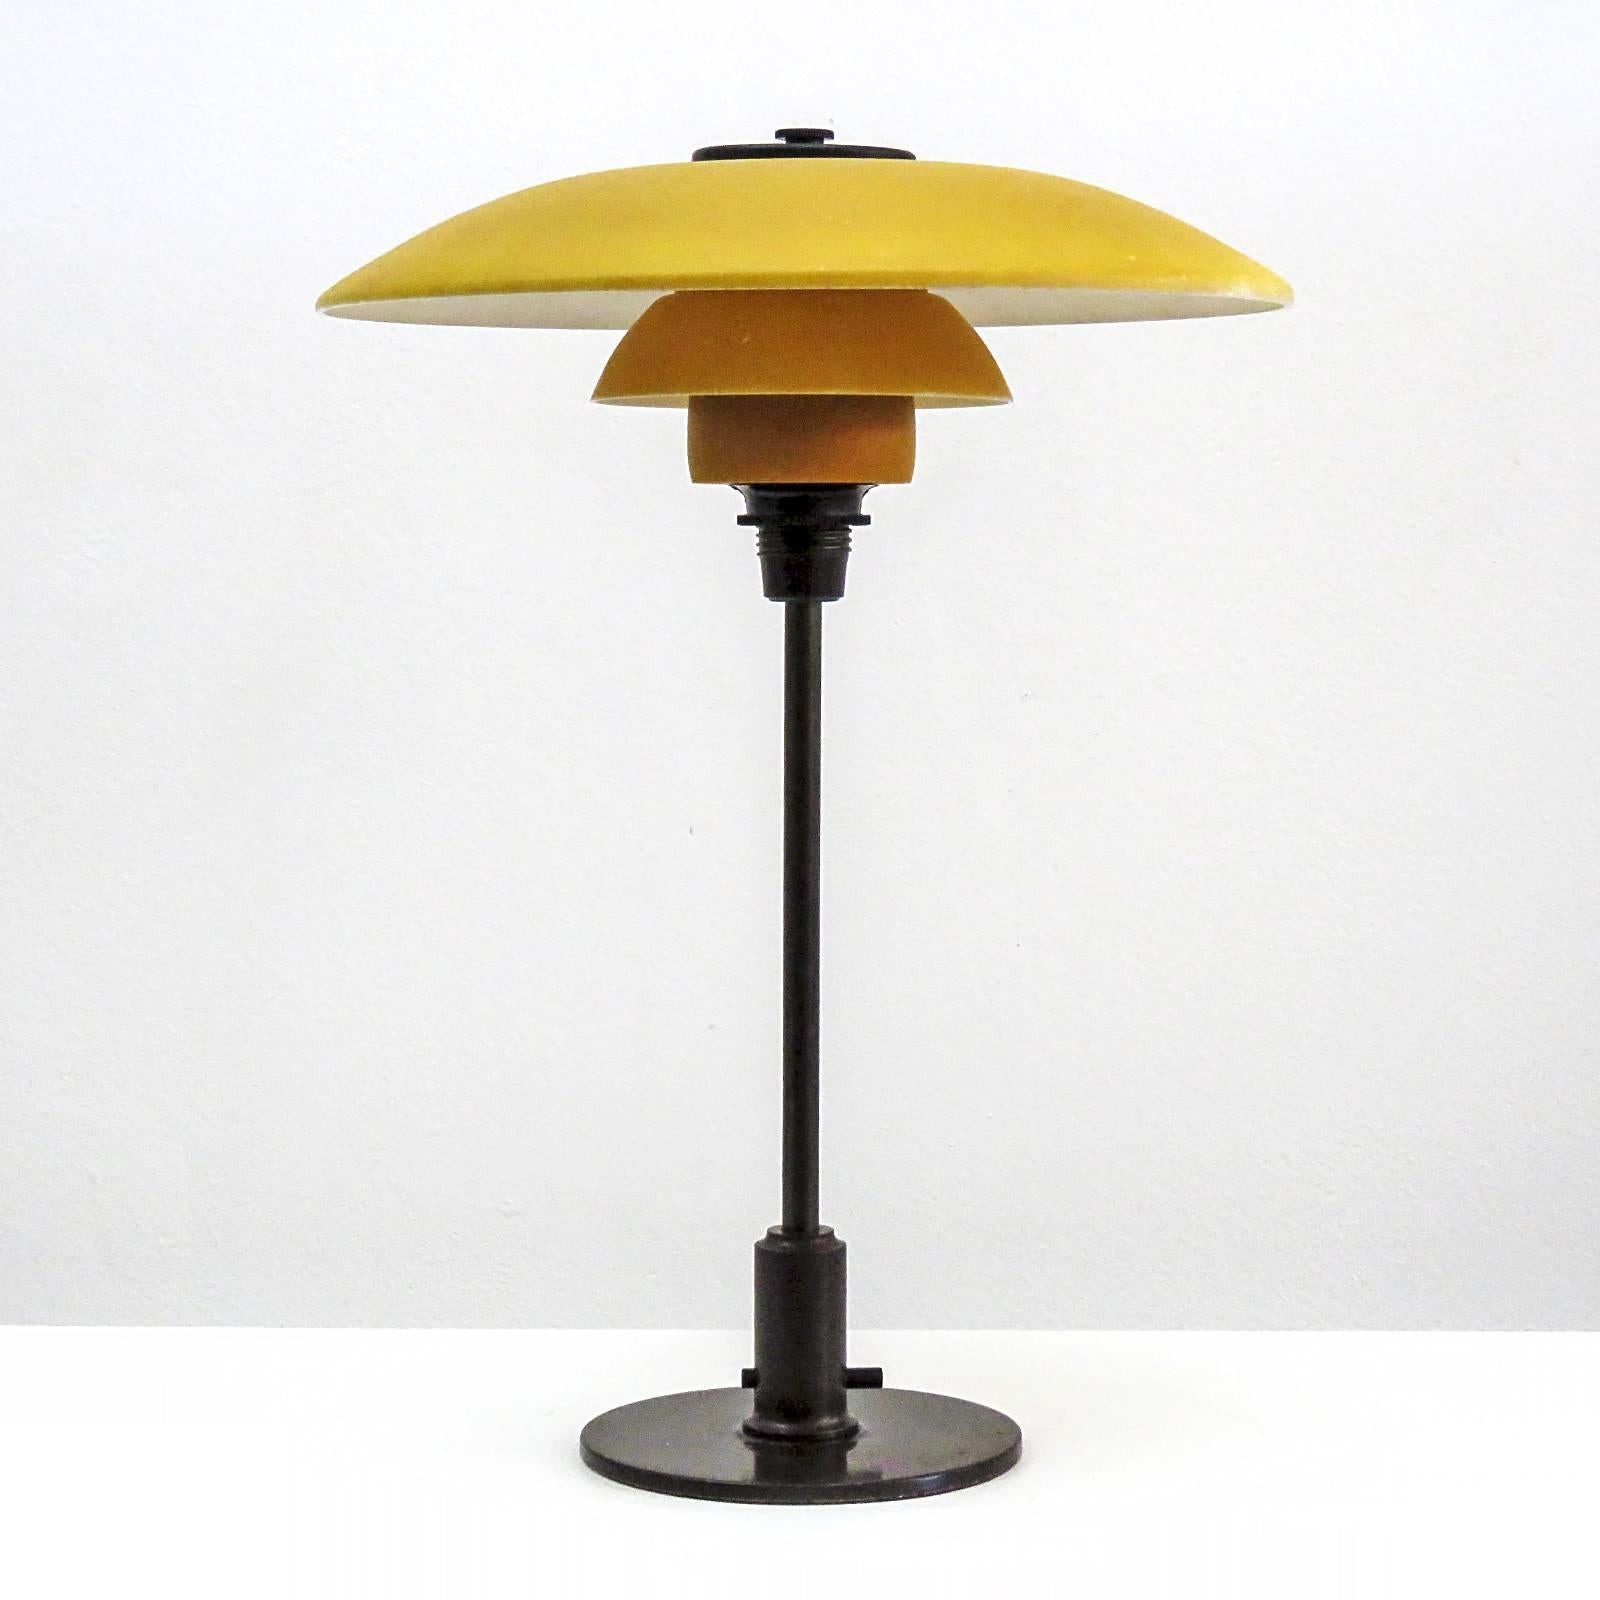 Rare Poul Henningsen. PH-3½/2 table lamp with original single-layer yellow painted/opal glass shade set on a browned brass stem and shade holder with wire legs. Bakelite through switch on the stem and bakelite cover plate, produced by Louis Poulsen